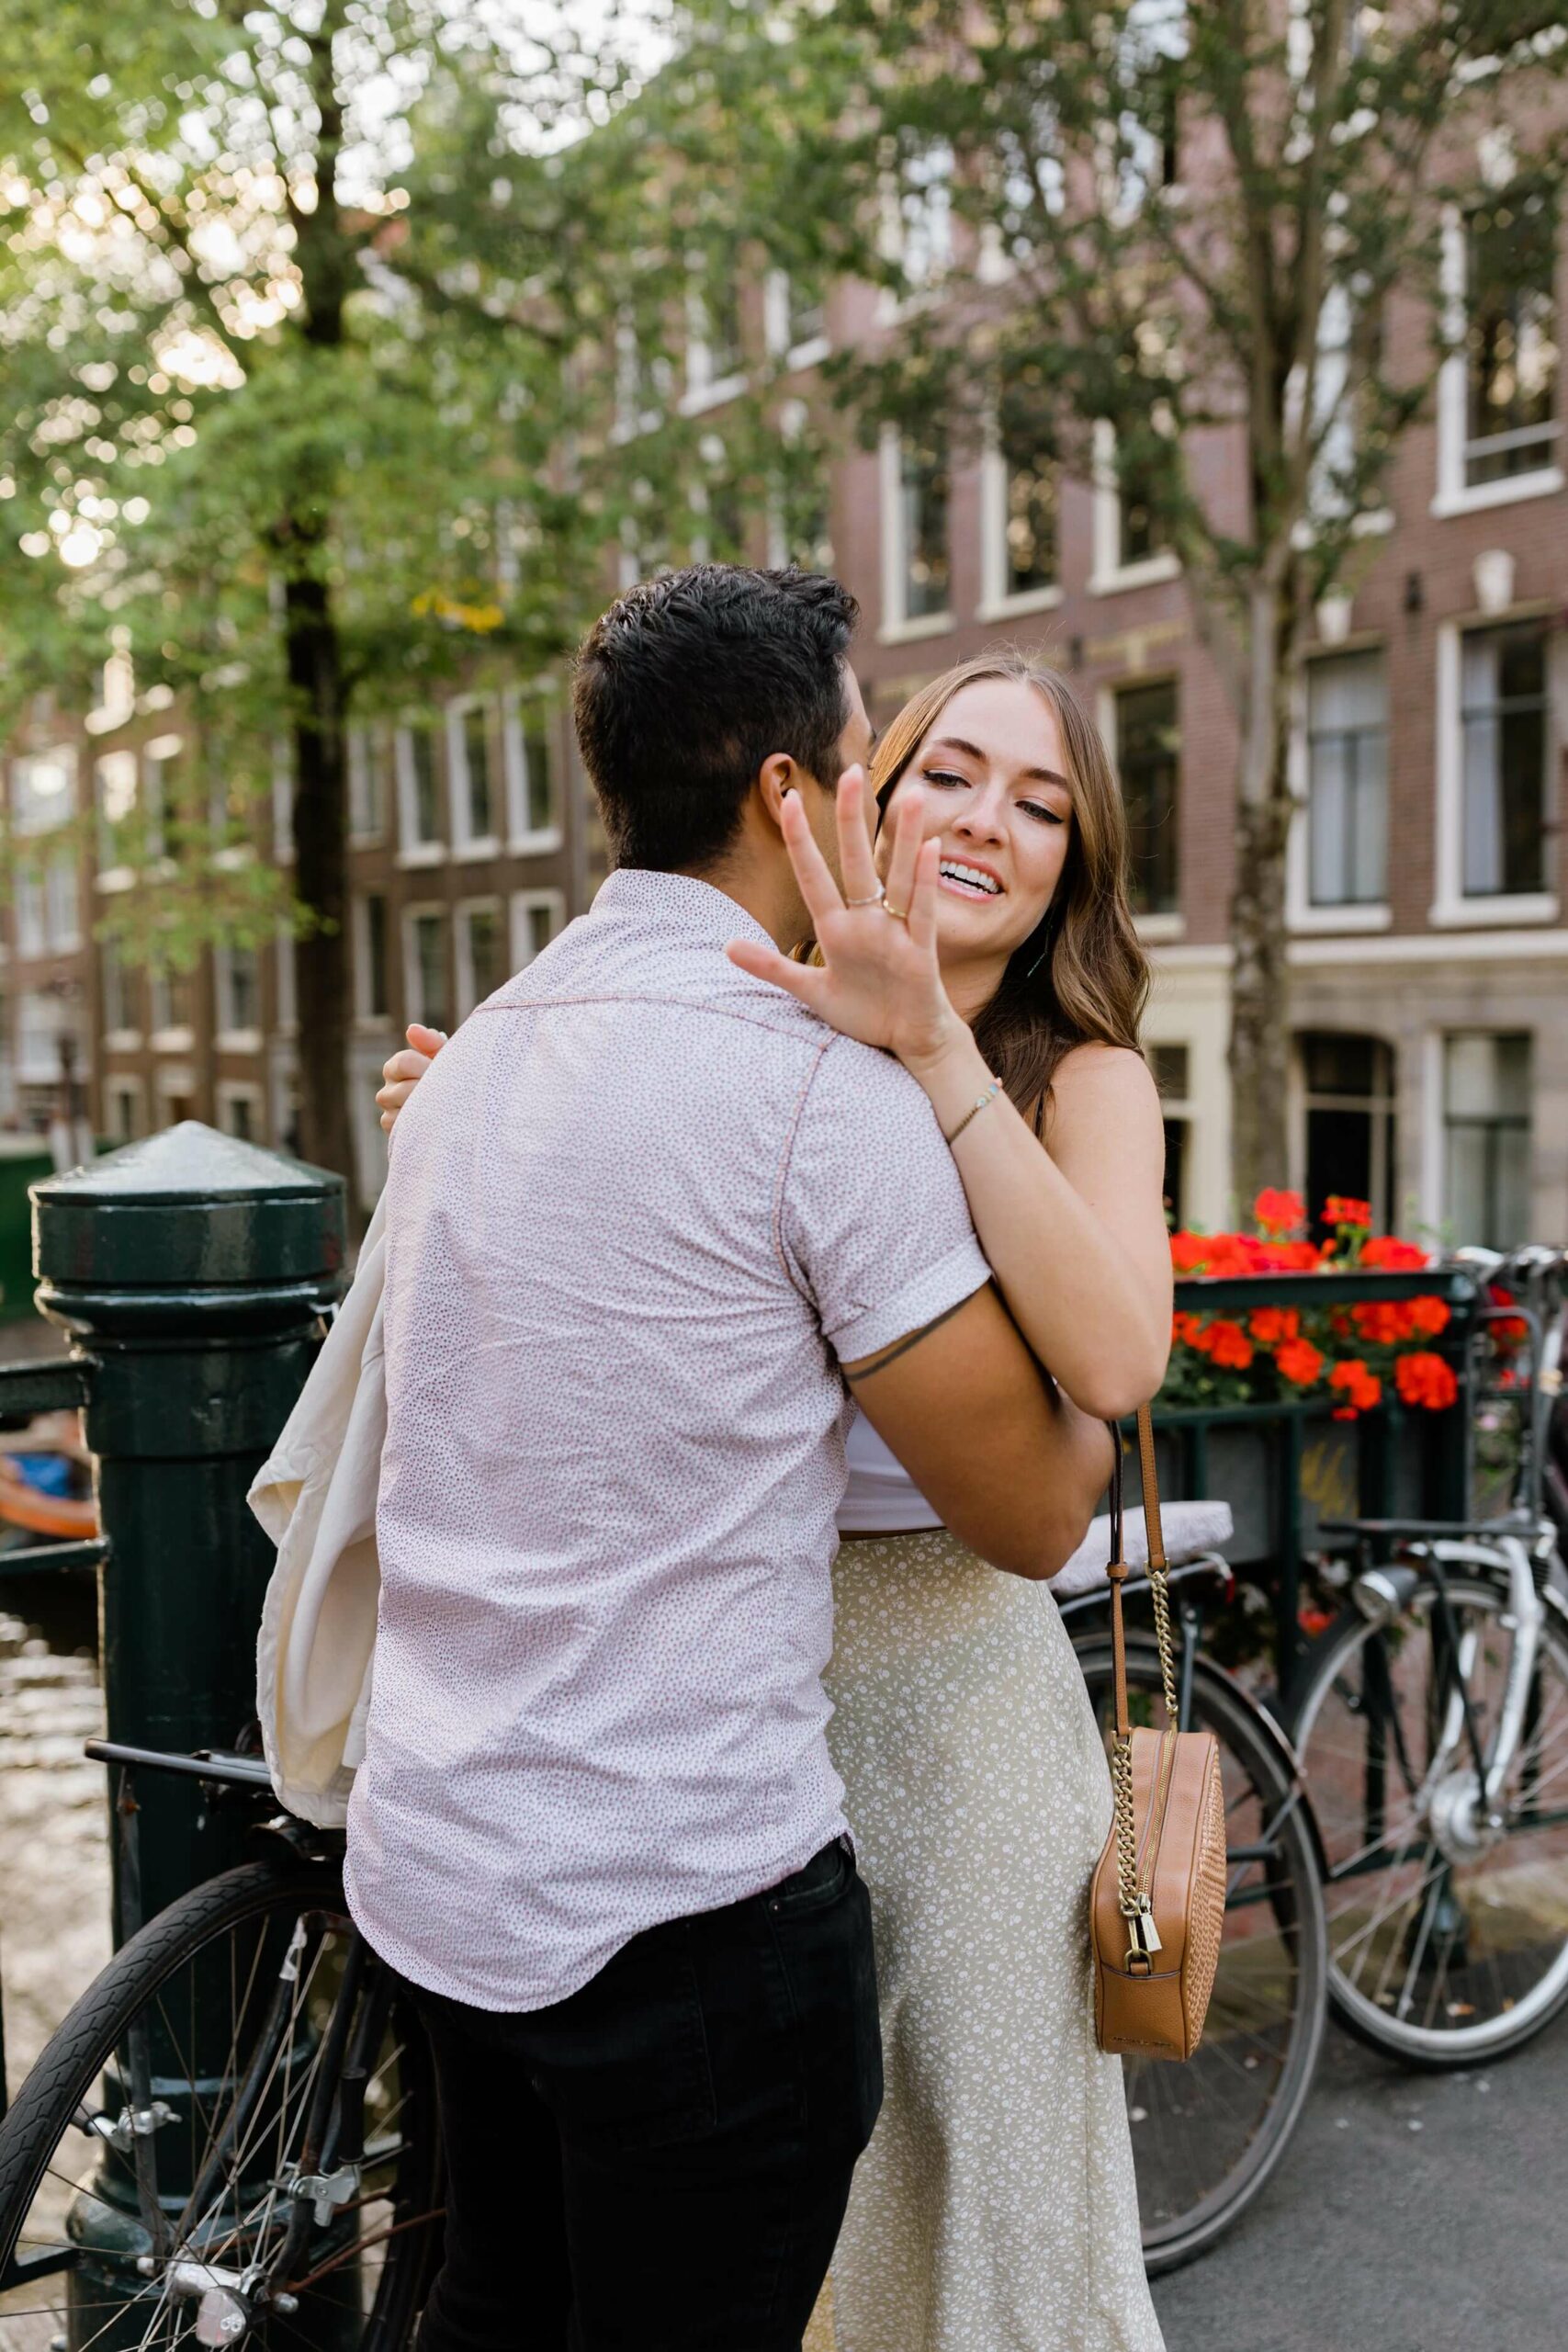 alt="surprise proposal in Amsterdam next to canal"